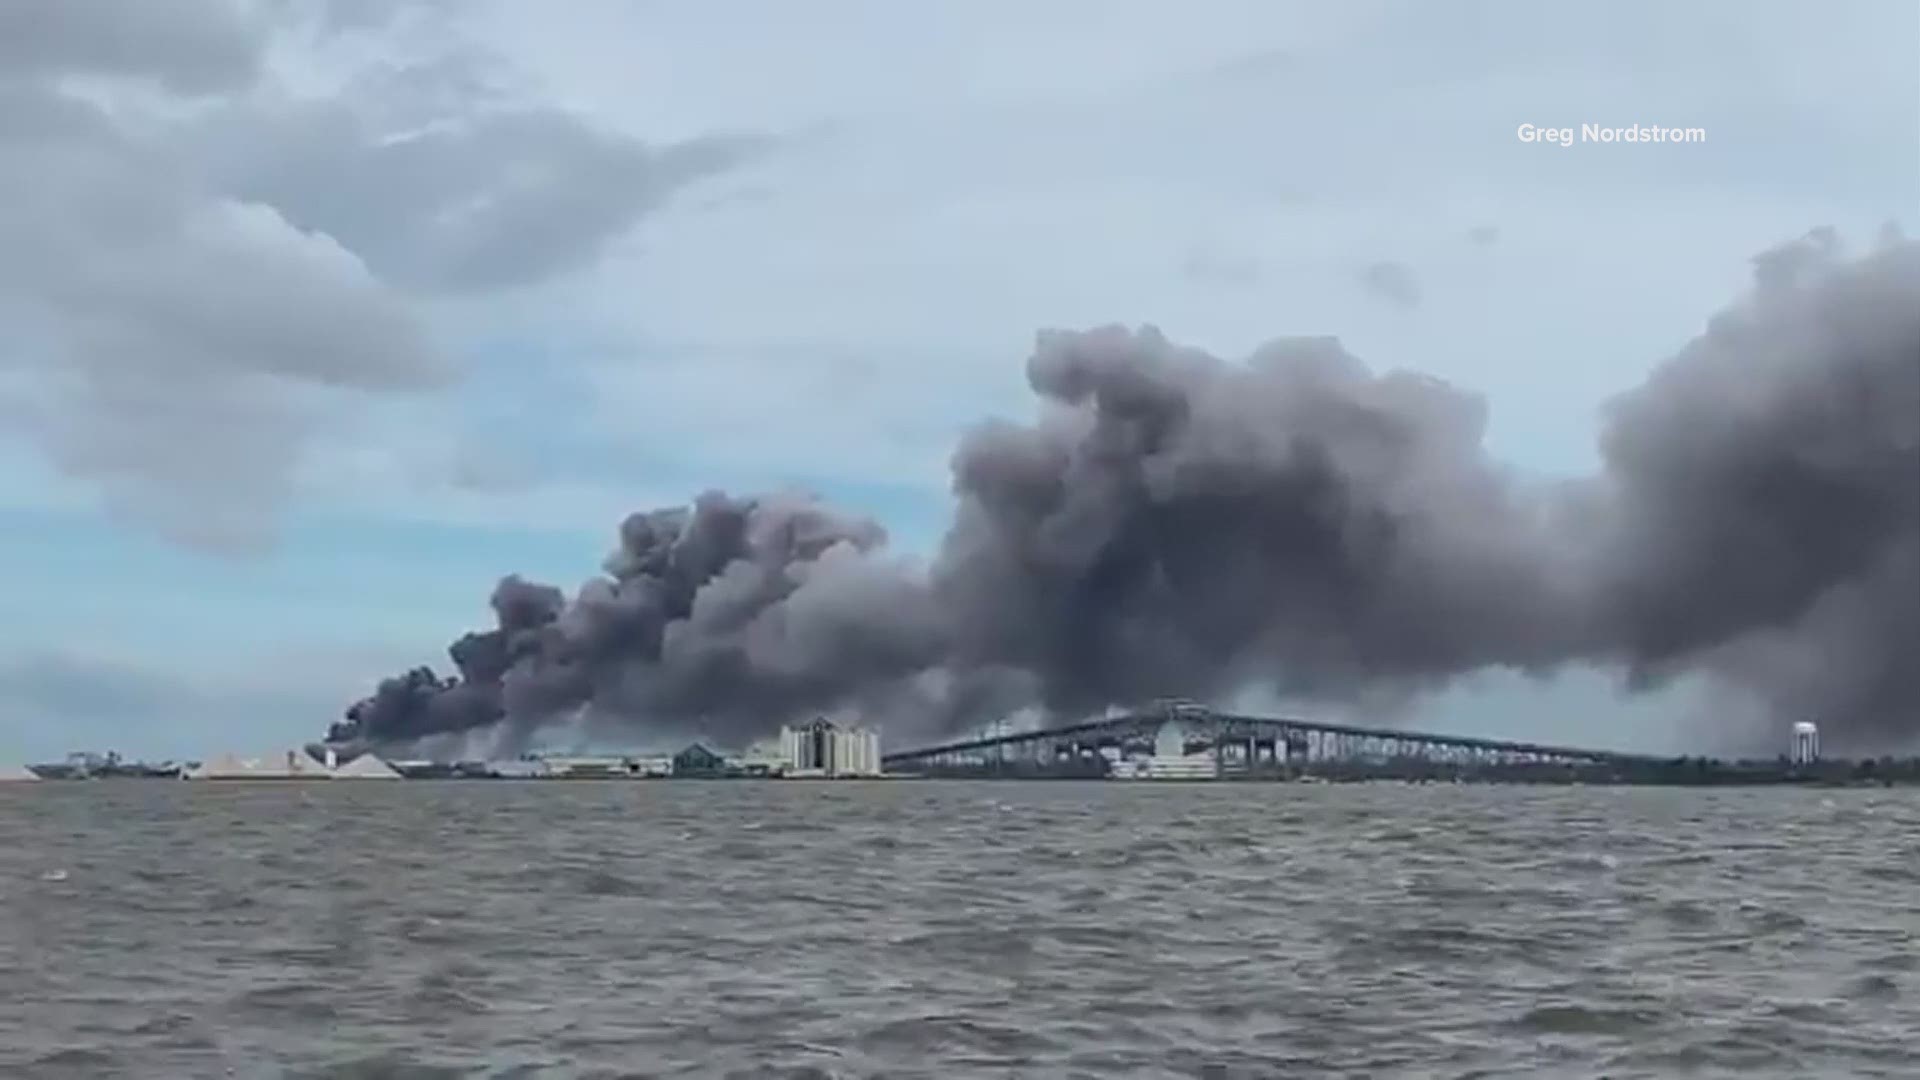 A large fire erupted at a chemical plant about five miles from Lake Charles. Videos show large plums of black smoke rising from the plant. (Credit: Greg Nordstrom)